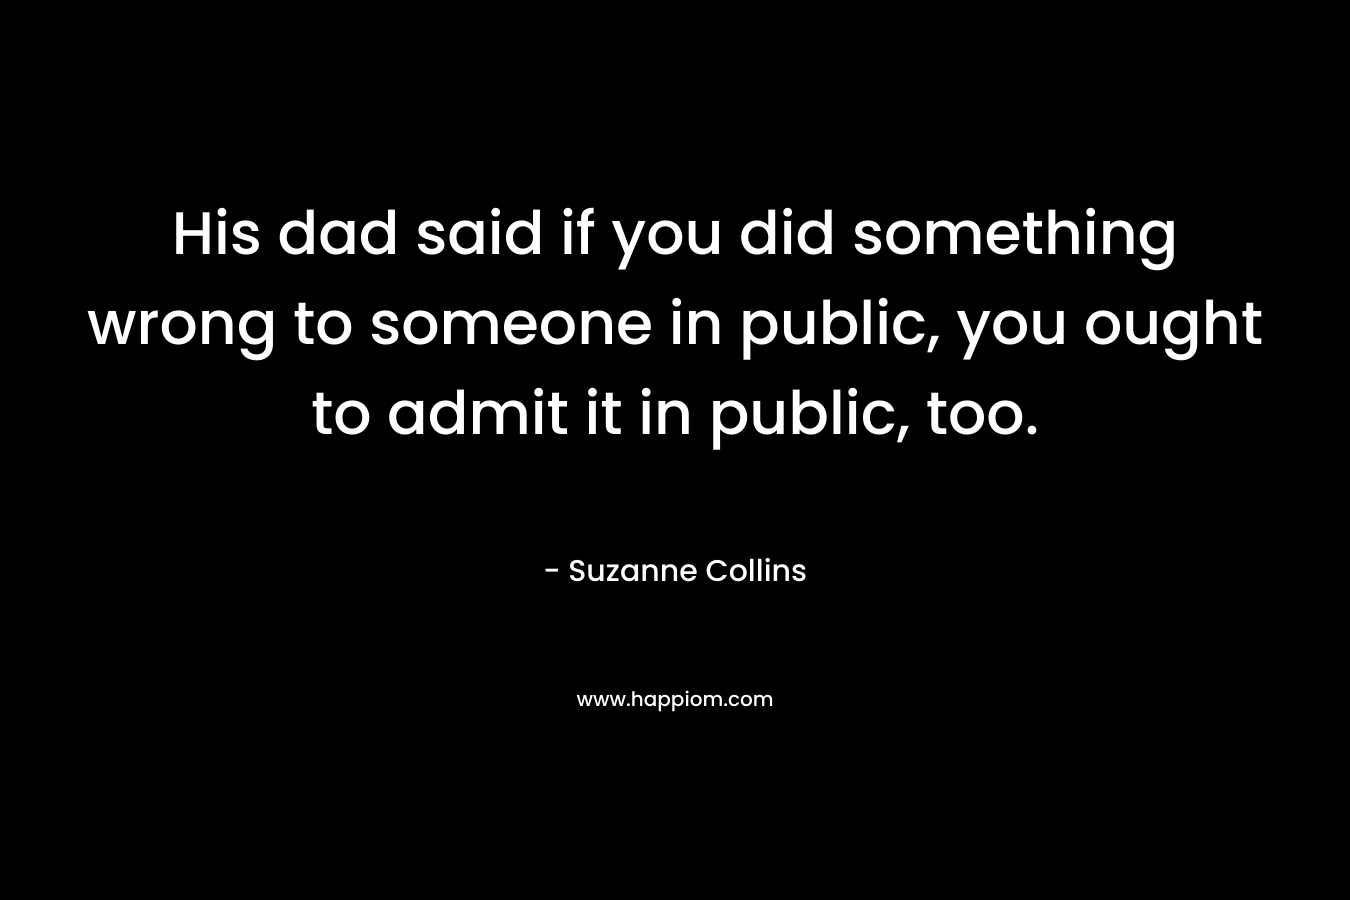 His dad said if you did something wrong to someone in public, you ought to admit it in public, too. – Suzanne Collins